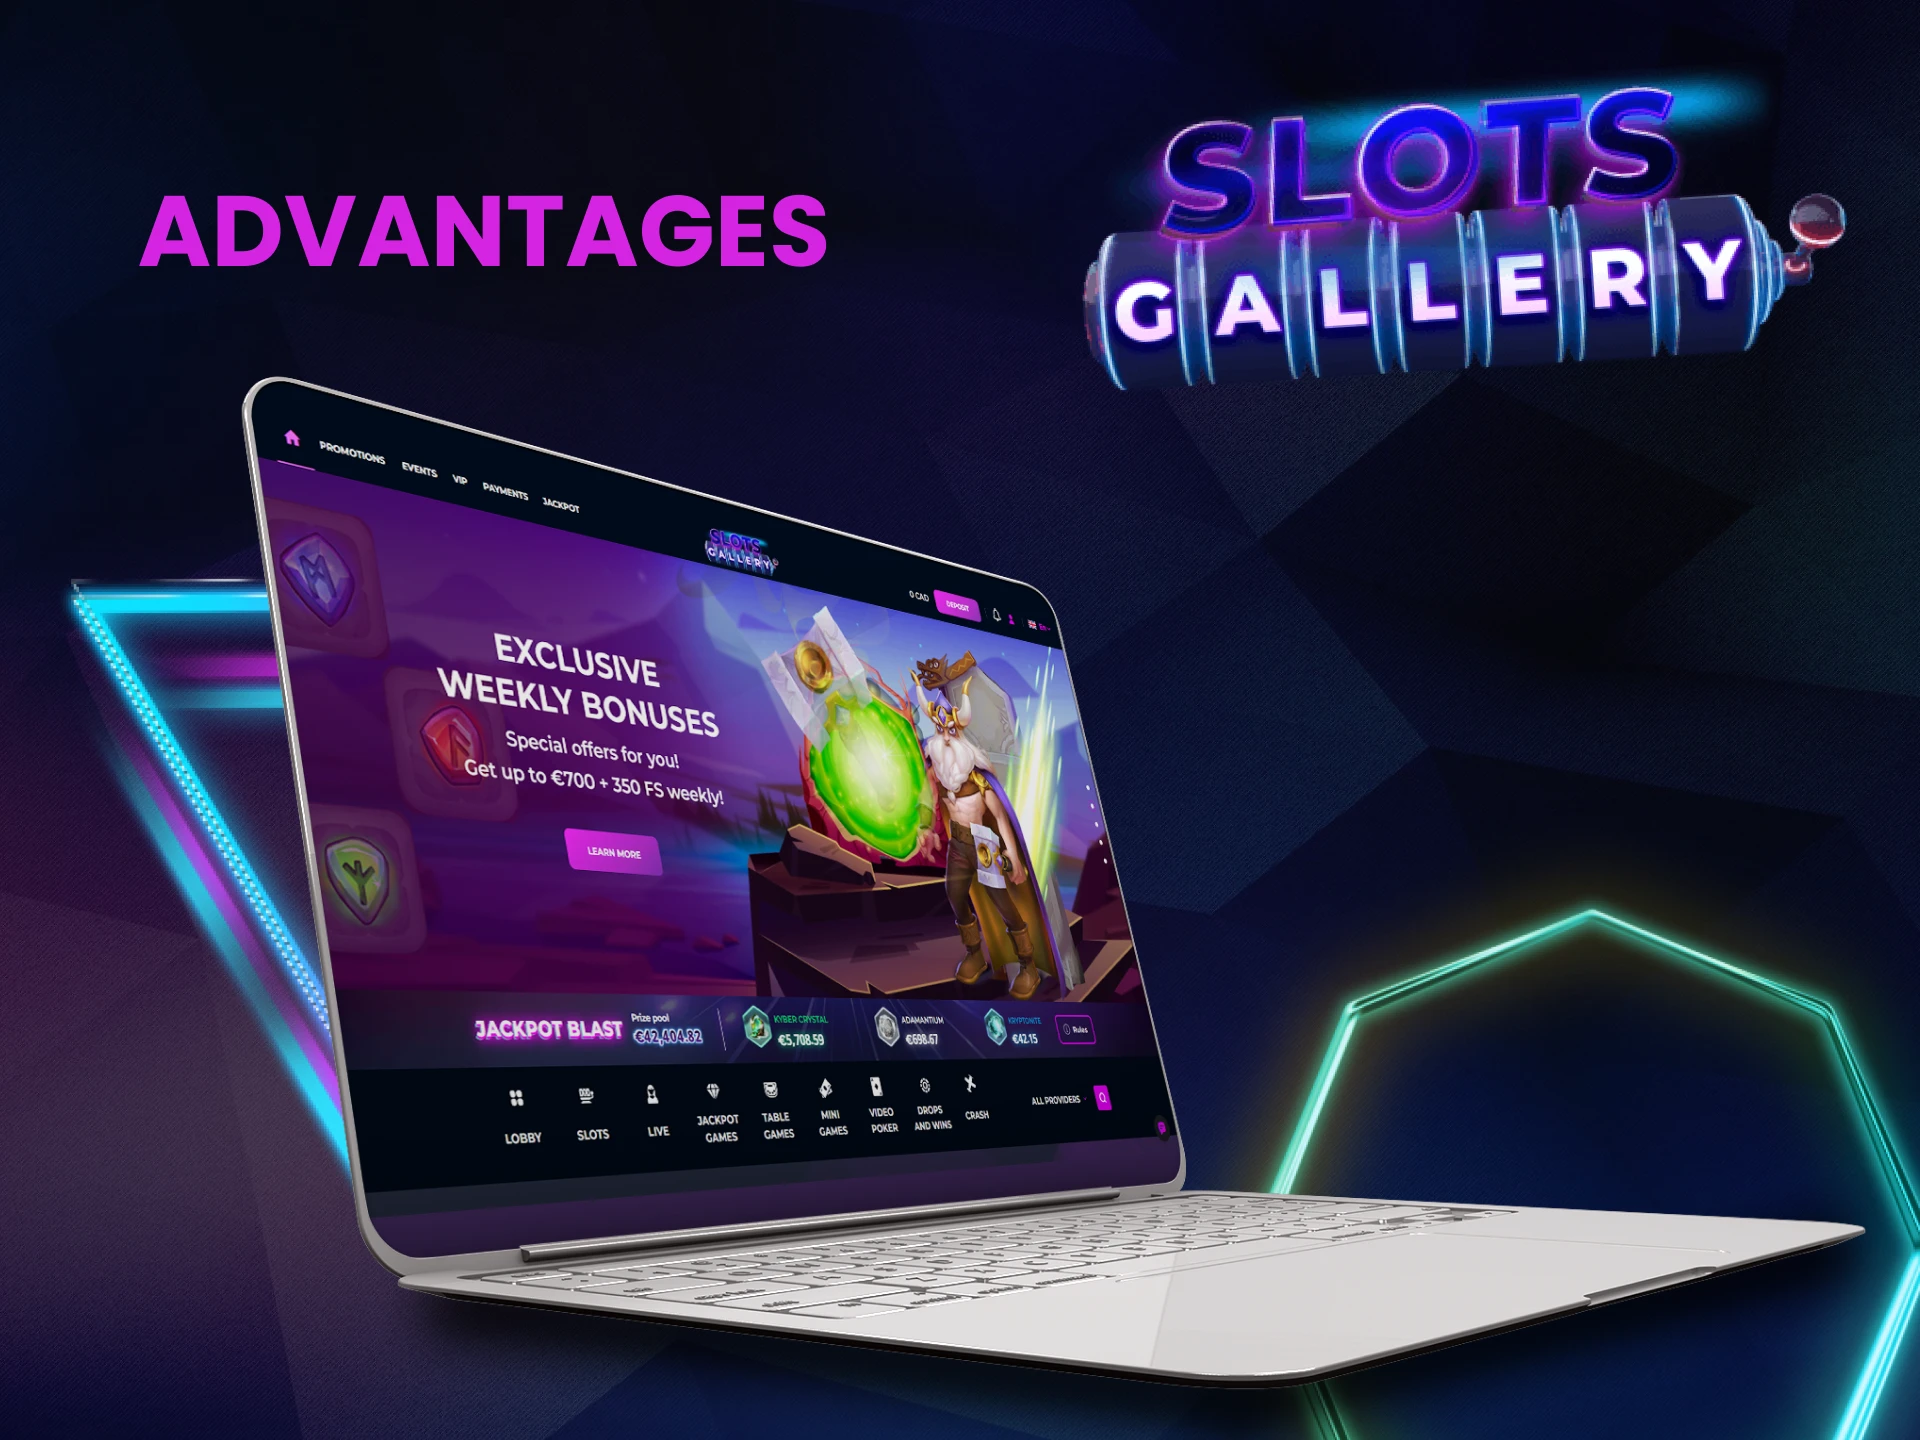 We will tell you a lot about the Slots Gallery service.